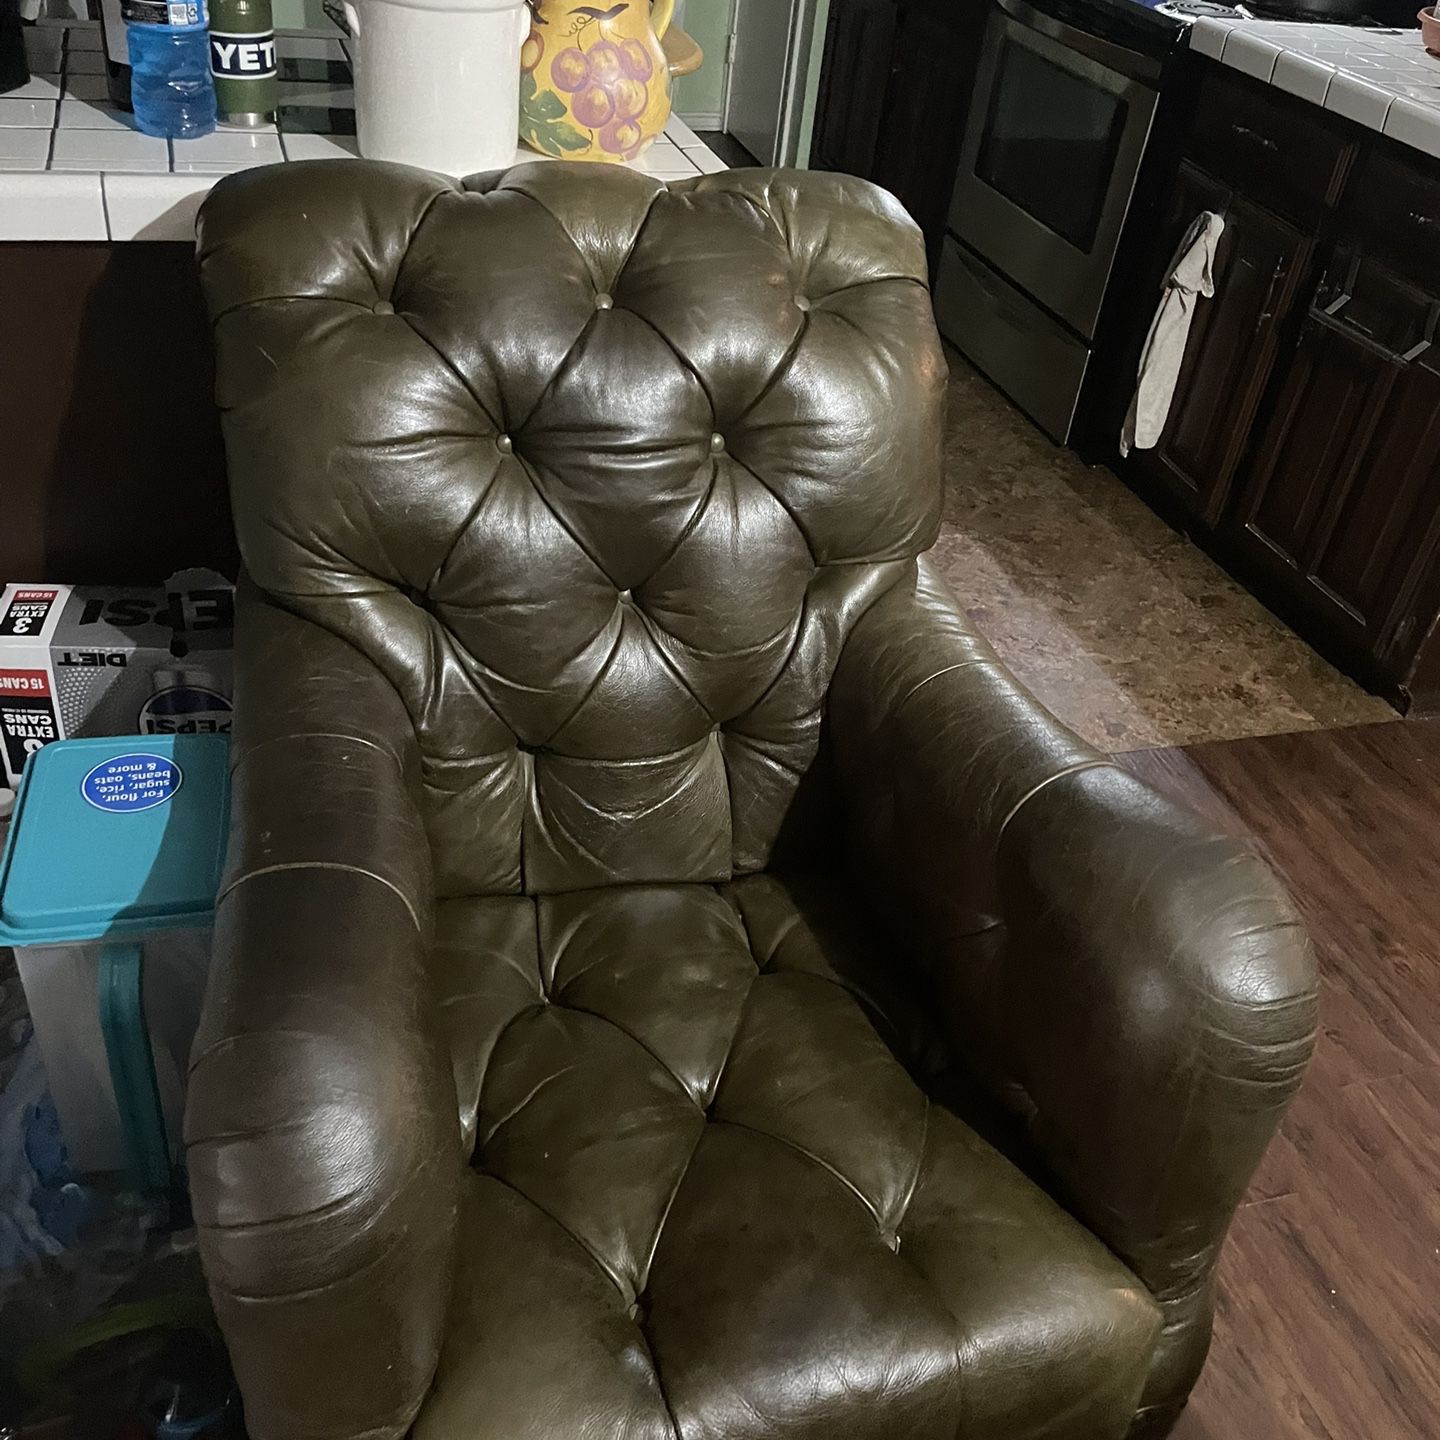 Vintage Green Leather Chair